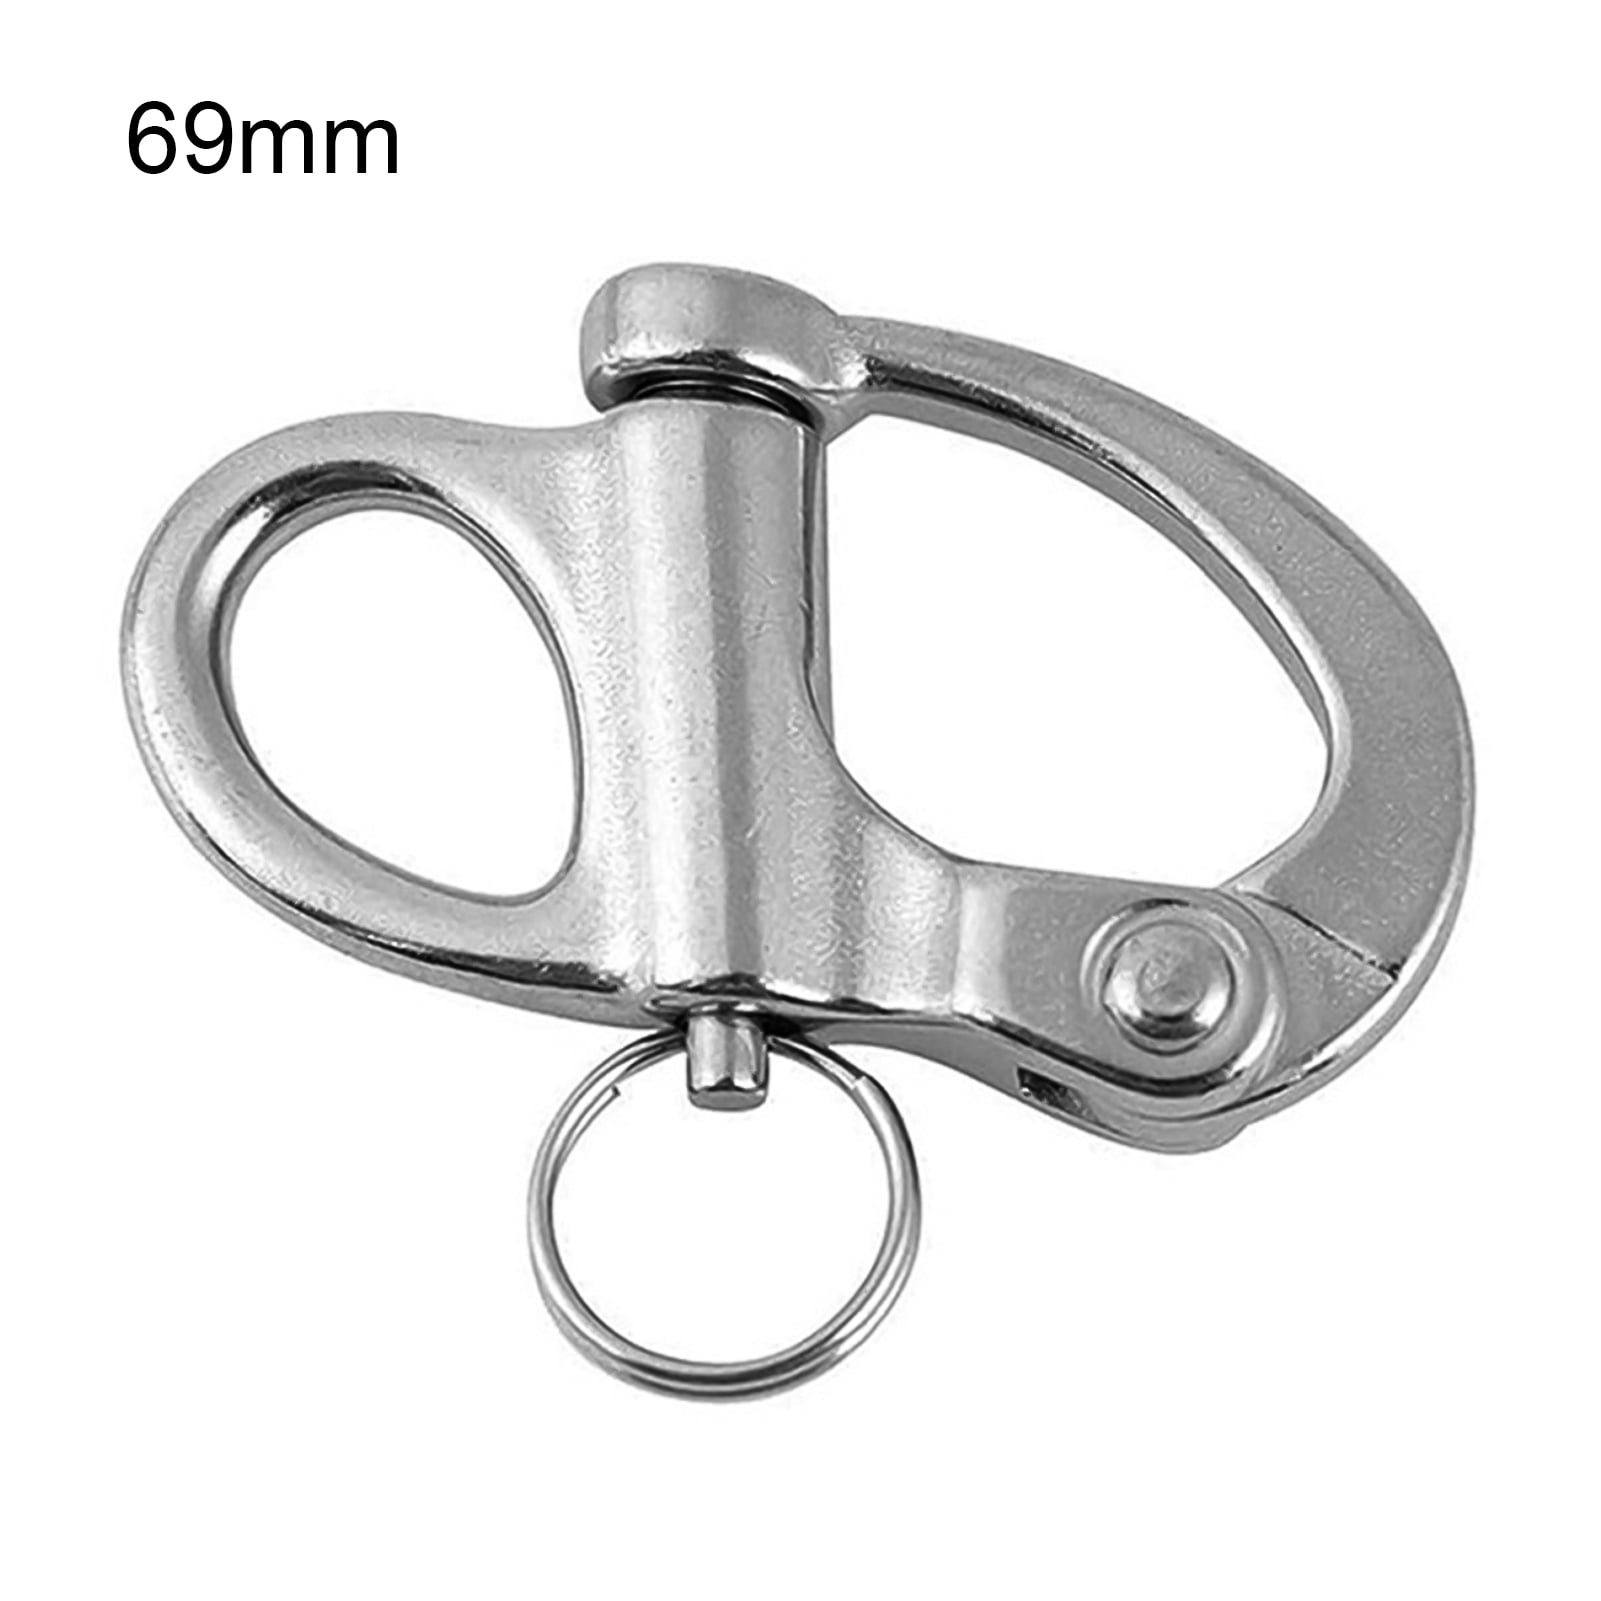 Stainless Steel Swivel Snap Shackle Yacht Marine Boating Quick Release Clasp 